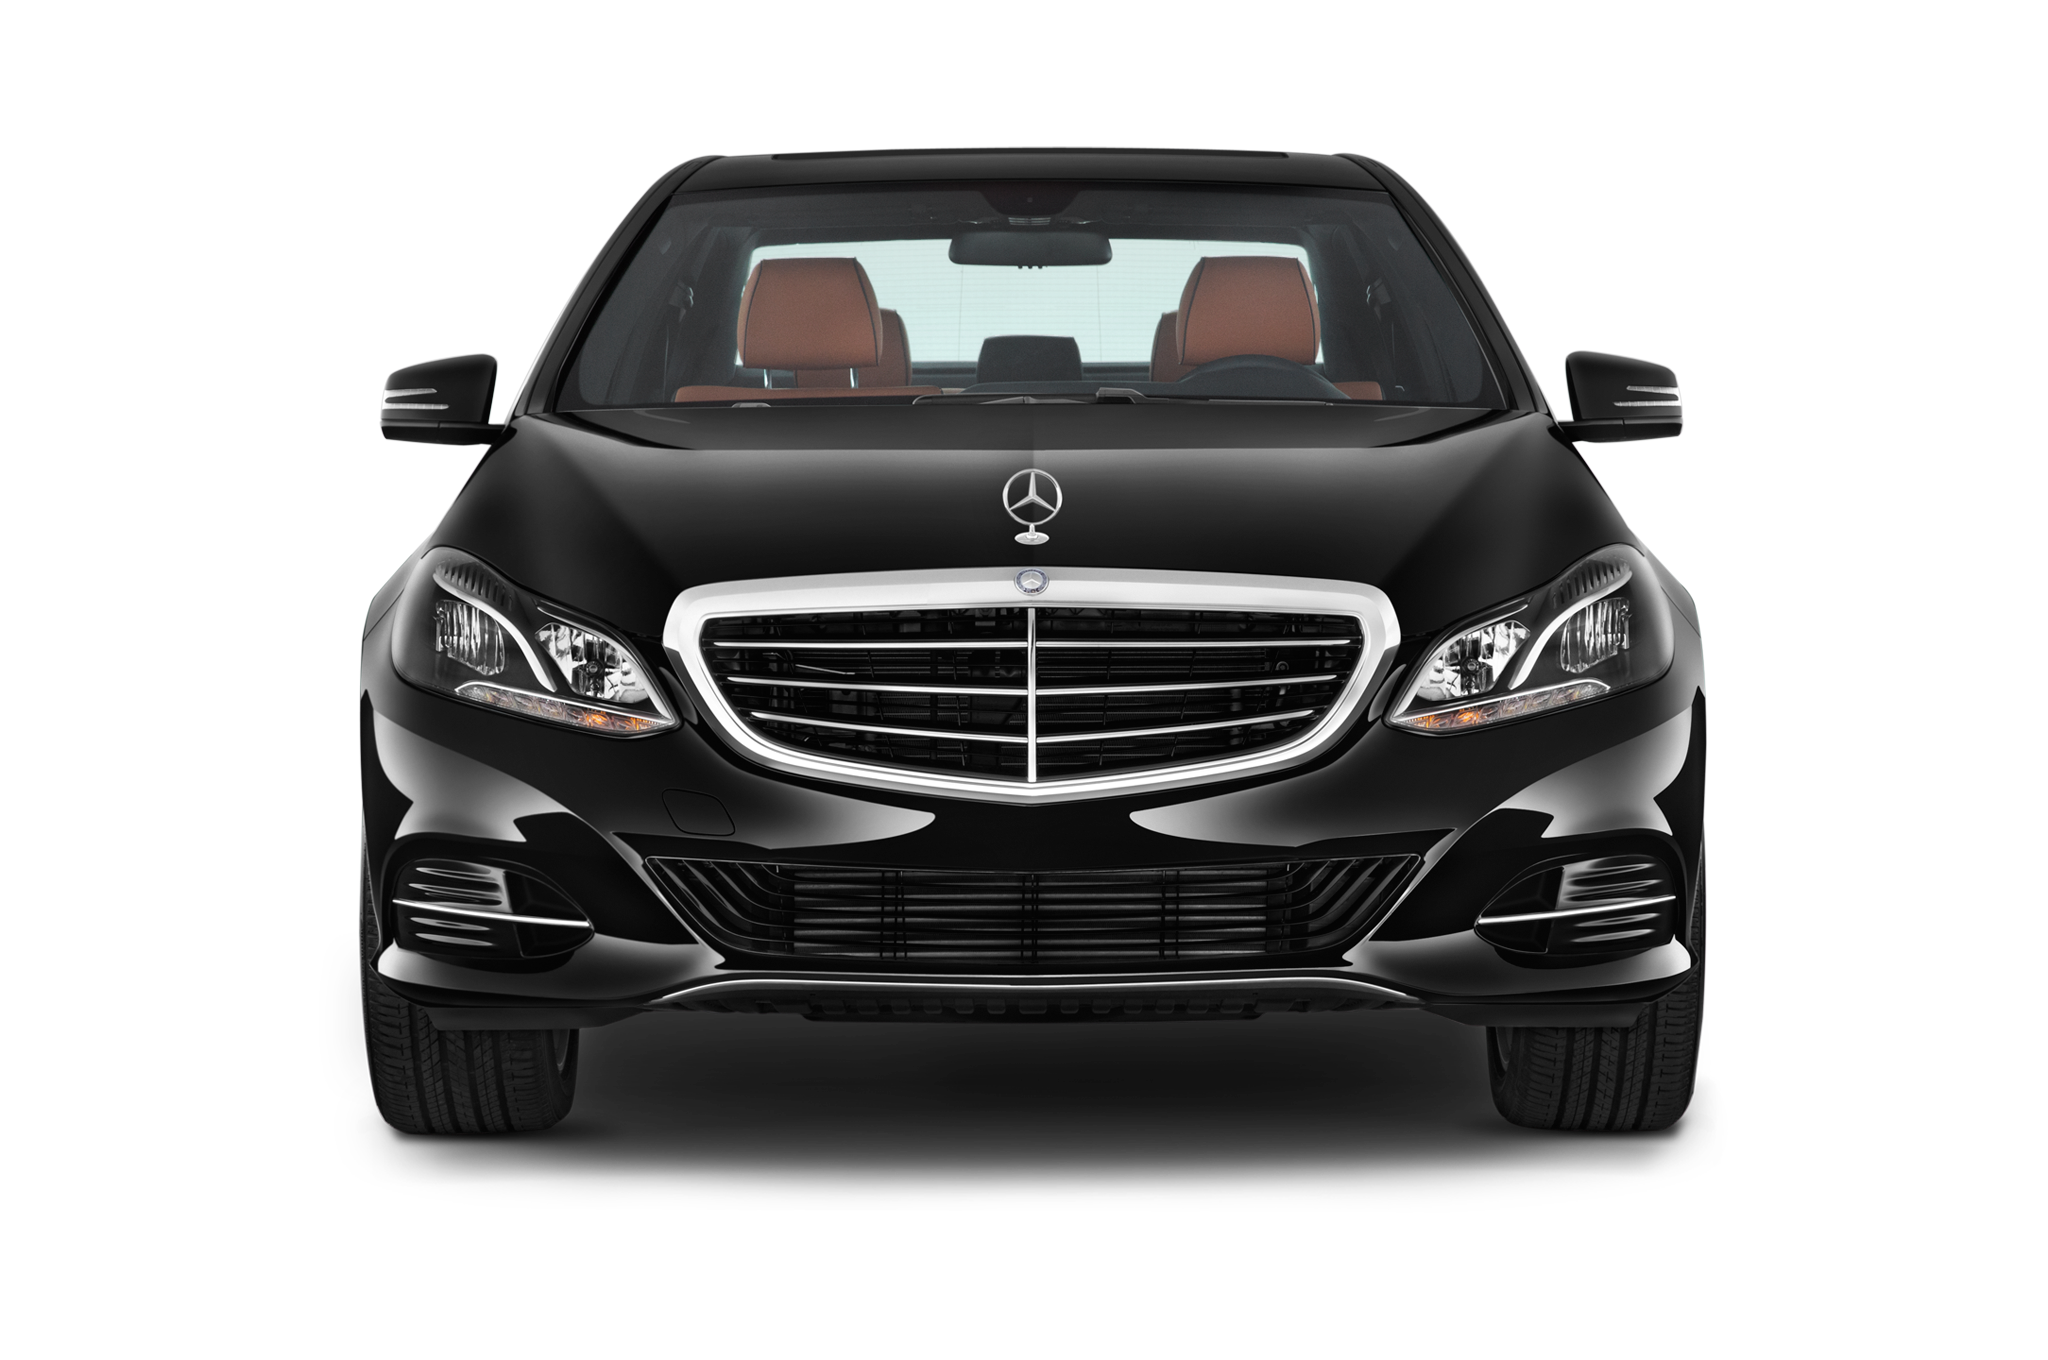 Mercedes Benz E Class E250 Model 2021 Price in Pkr Pakistan Shape and Interior Features Specifications